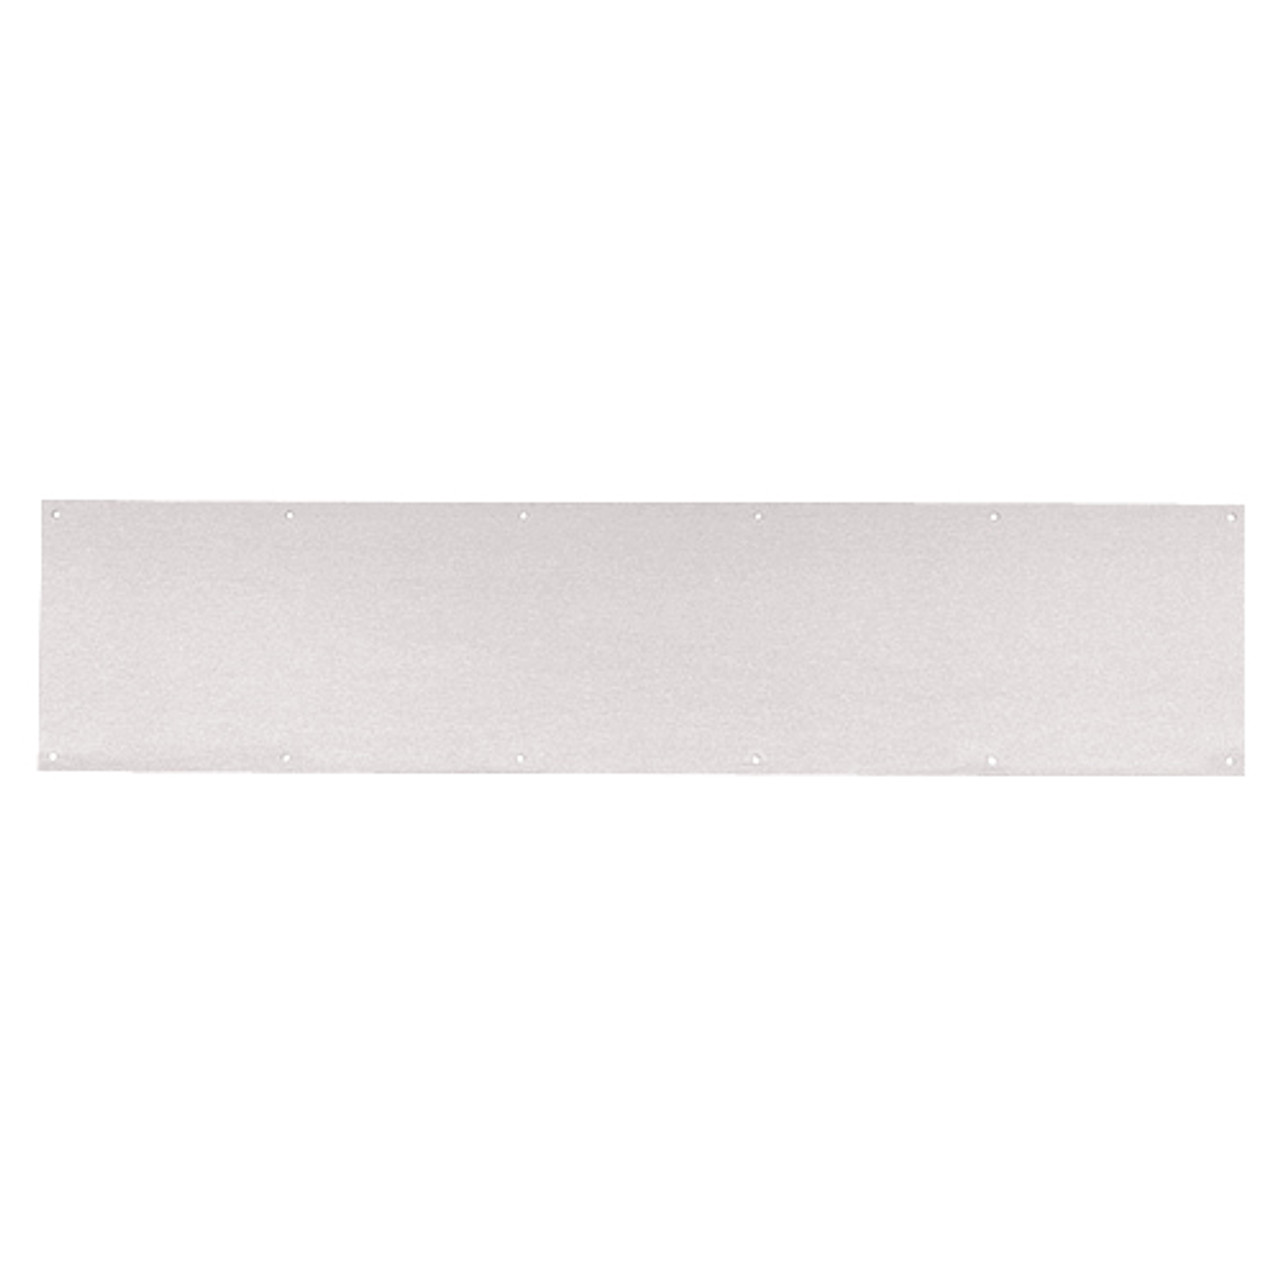 8400-US32-10x44-B-CS Ives 8400 Series Protection Plate in Bright Stainless Steel